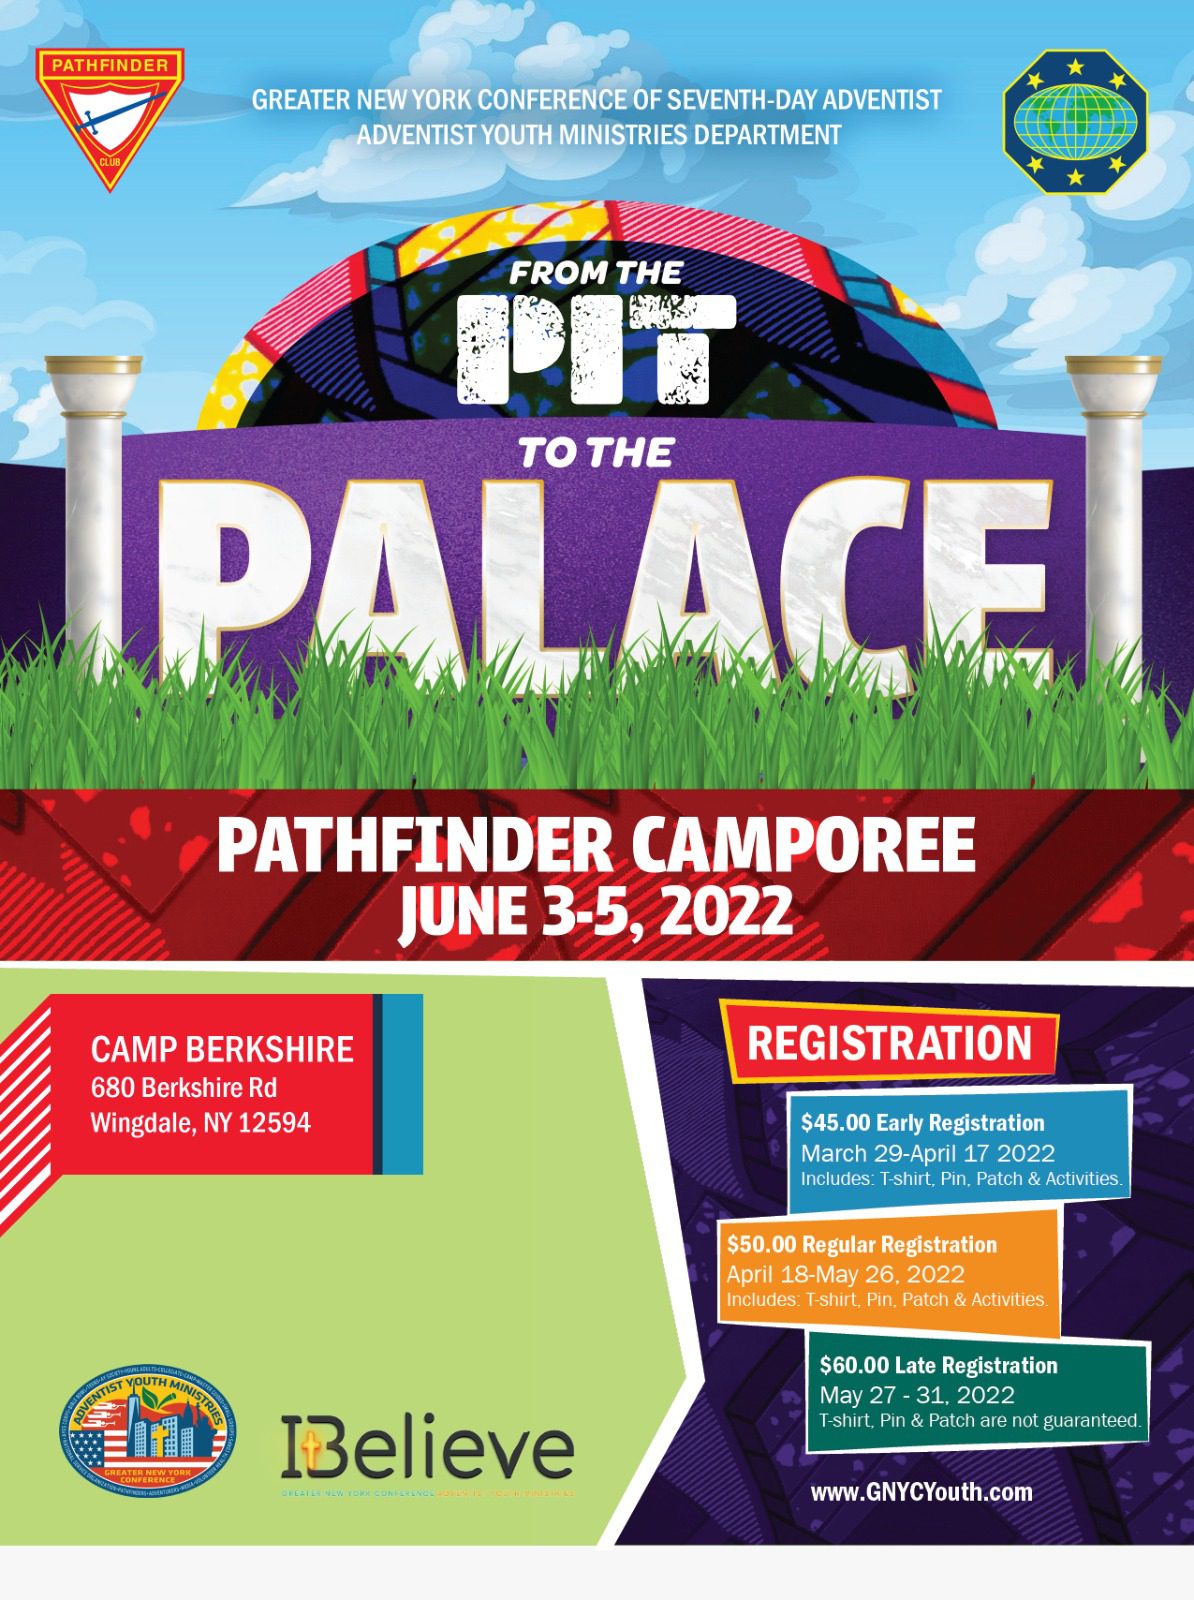 Pathfinder Camporee 2022 Adventist Youth Ministries Greater New